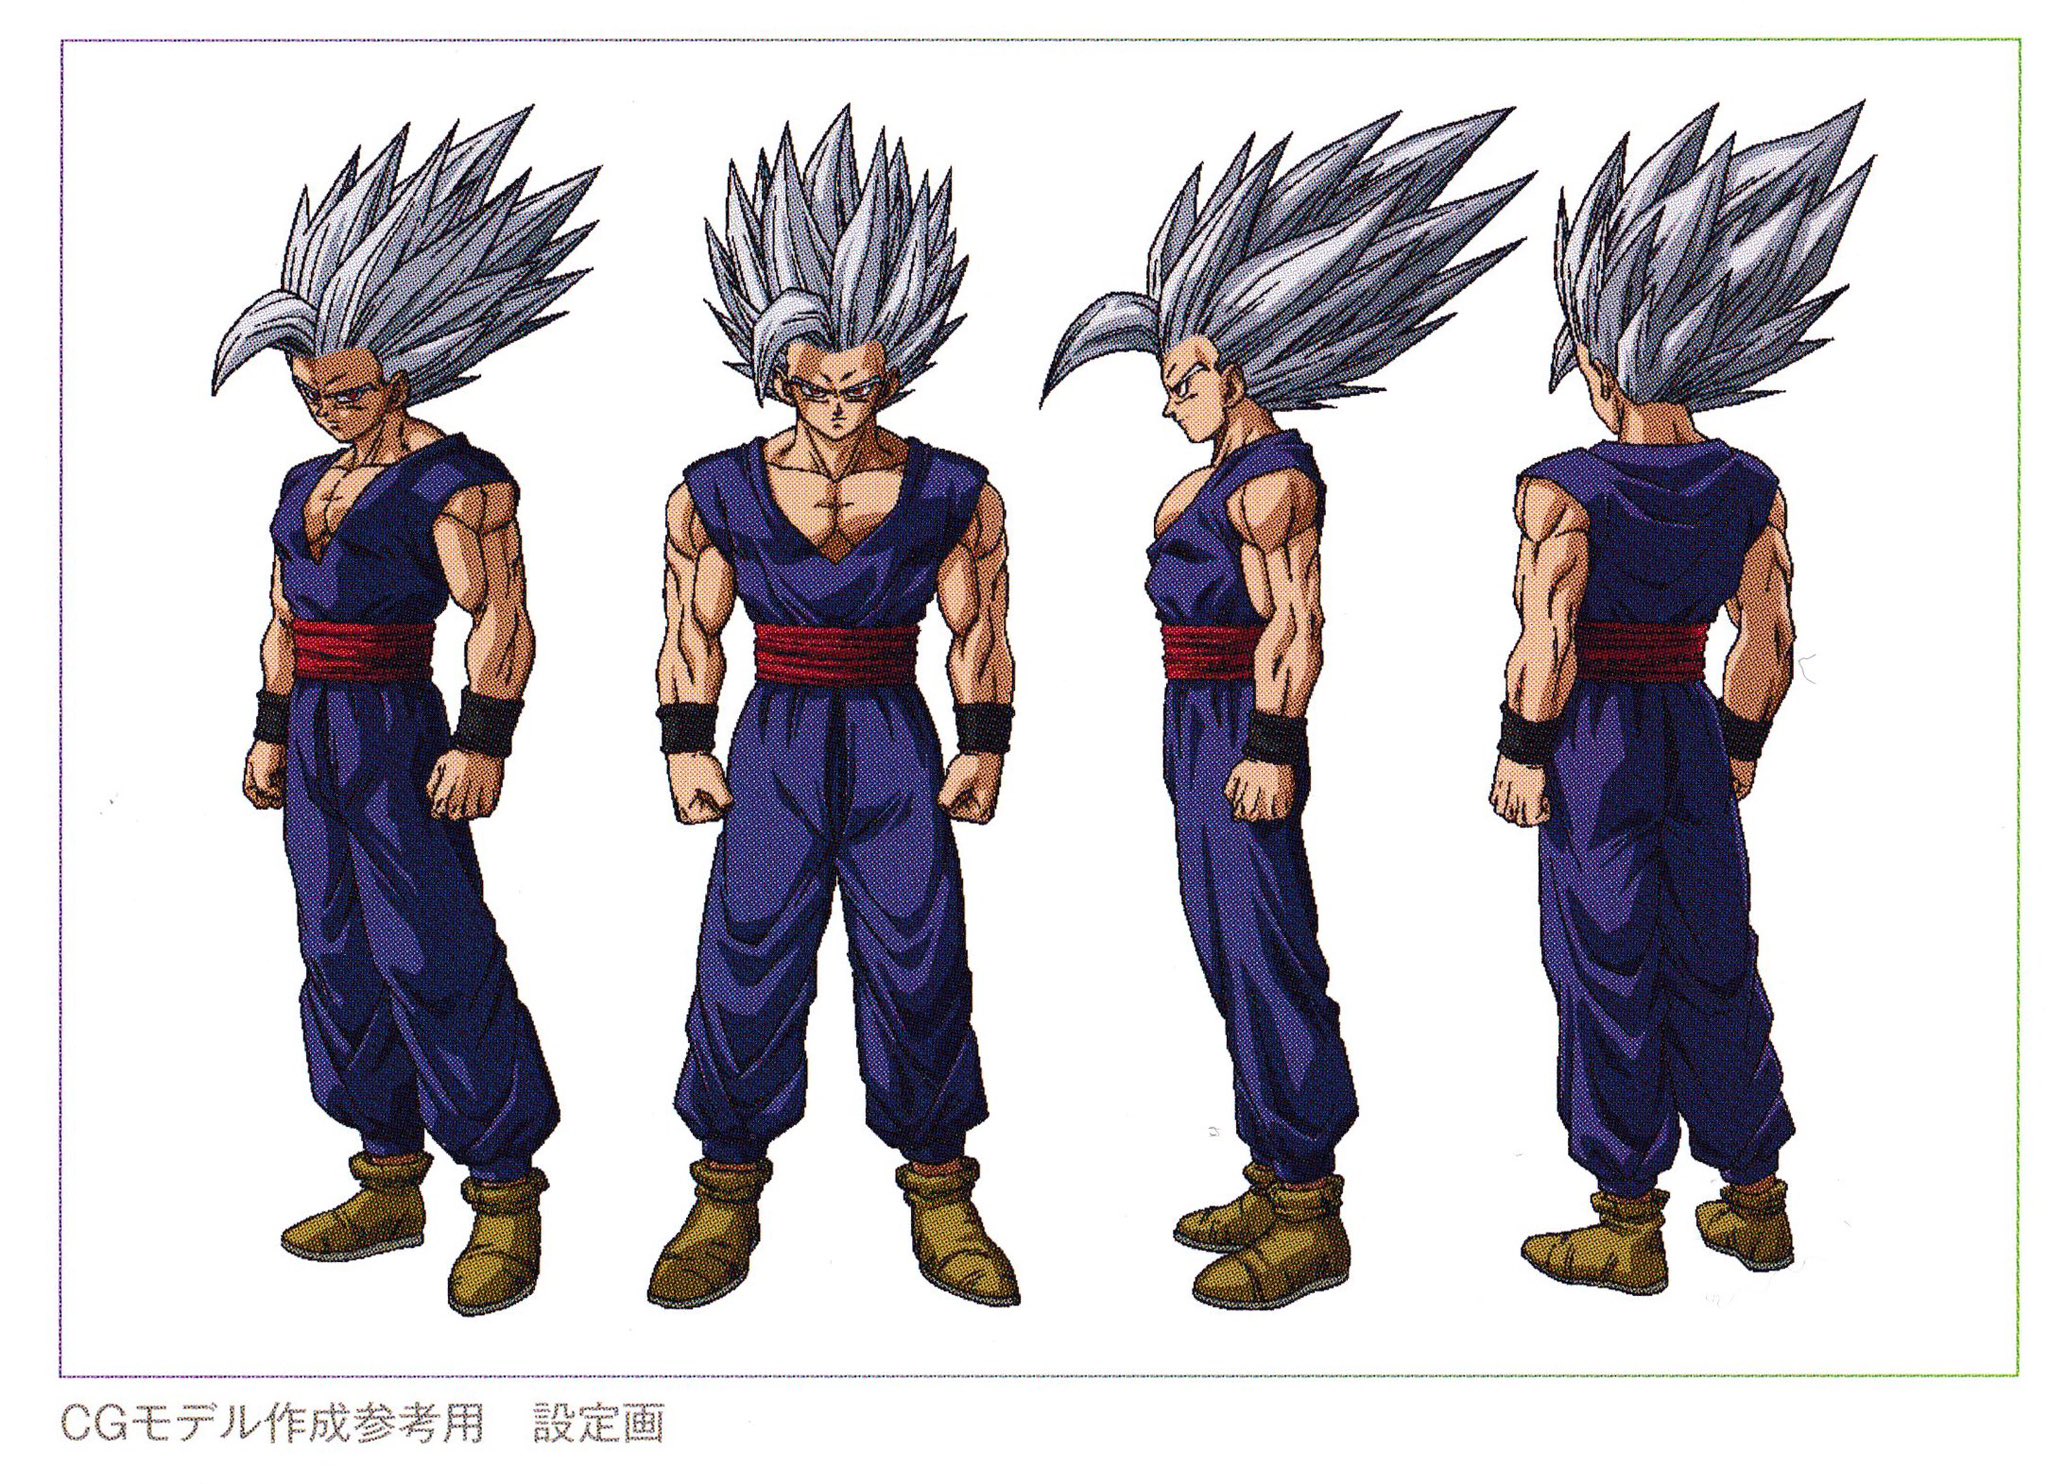 Gohan's New Form in Dragon Ball Super: Super Hero Explained